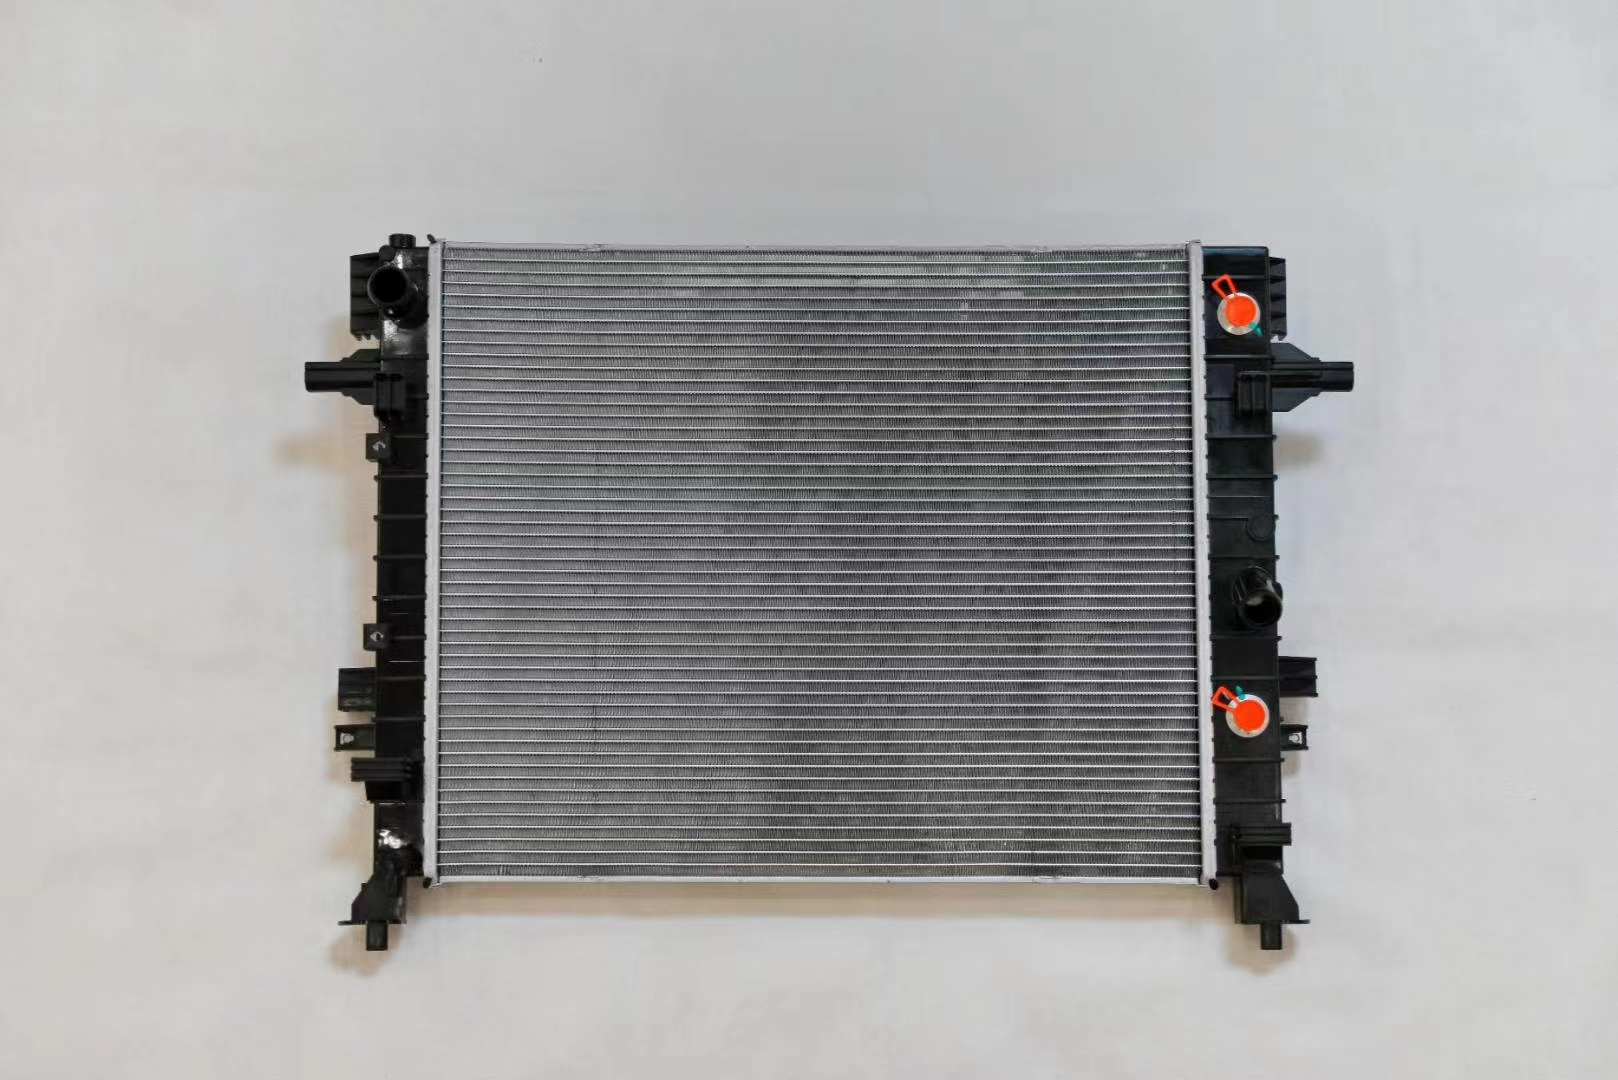 What is the function of the radiator?